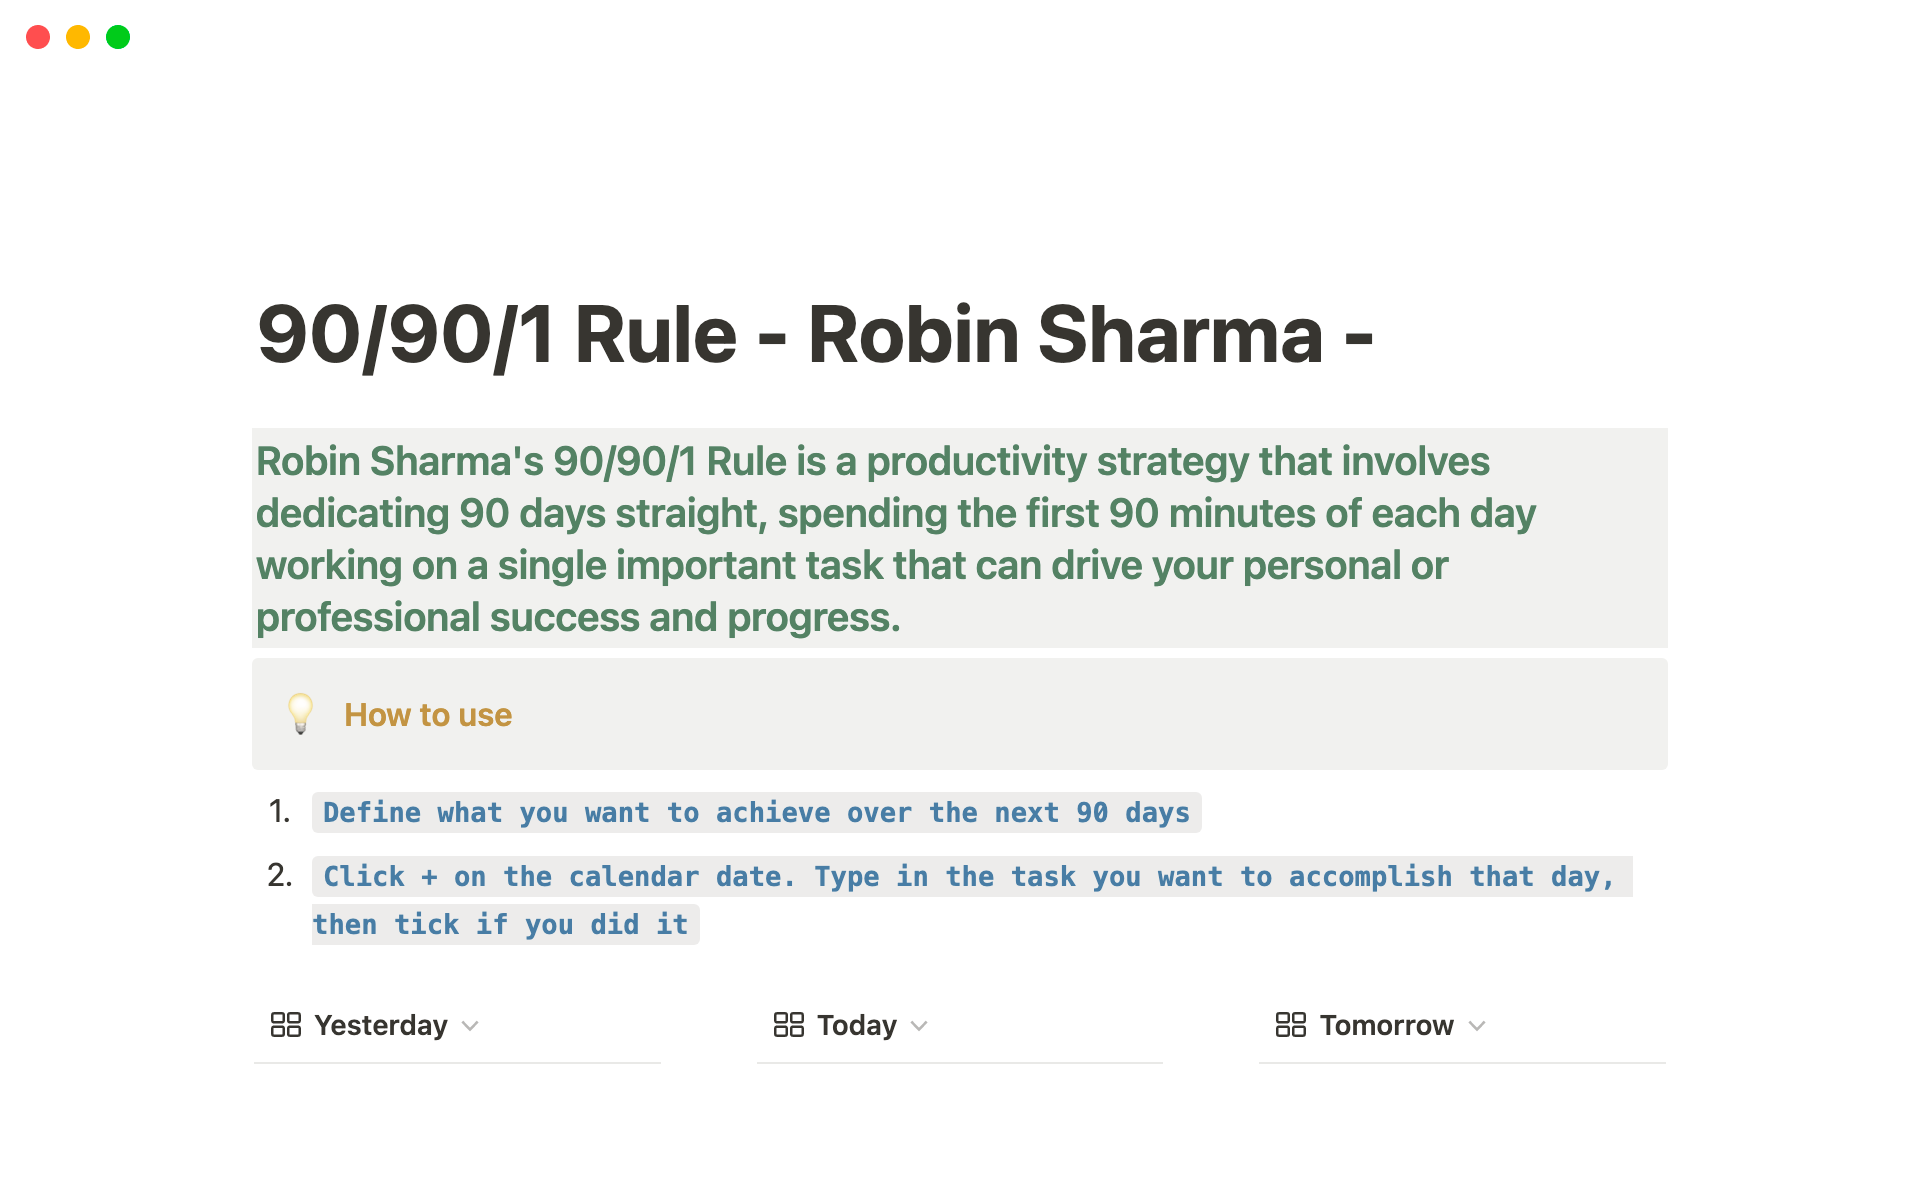 My model helps users achieve their goals efficiently using the 90/90/1 rule.